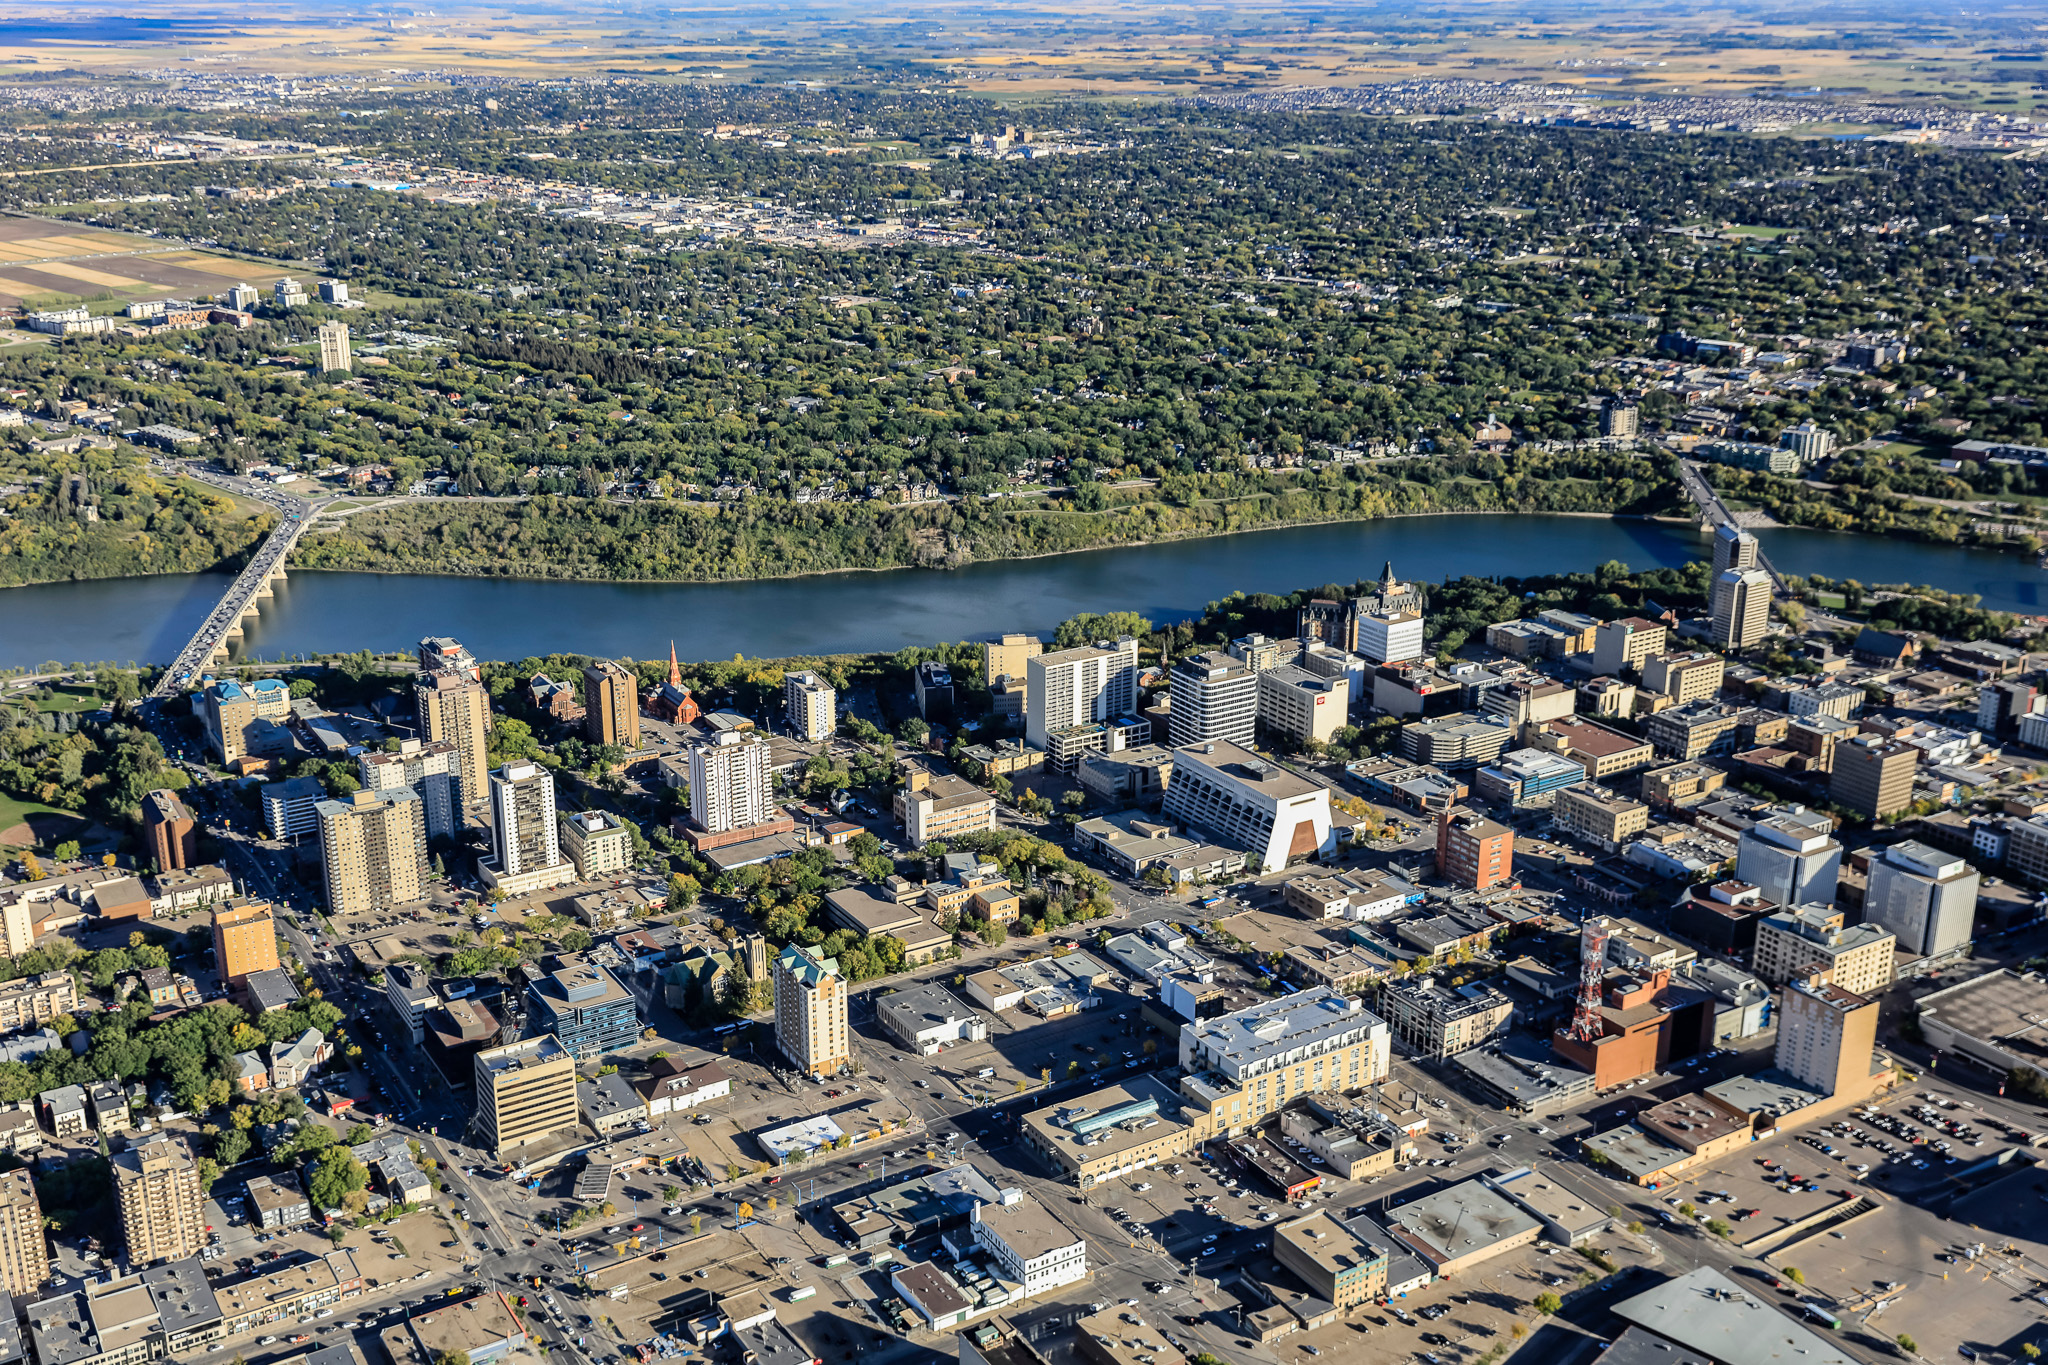 Aerial view of the Downtown (Cemtral Business District) area of Saskatoon.  Aug 7, 2016